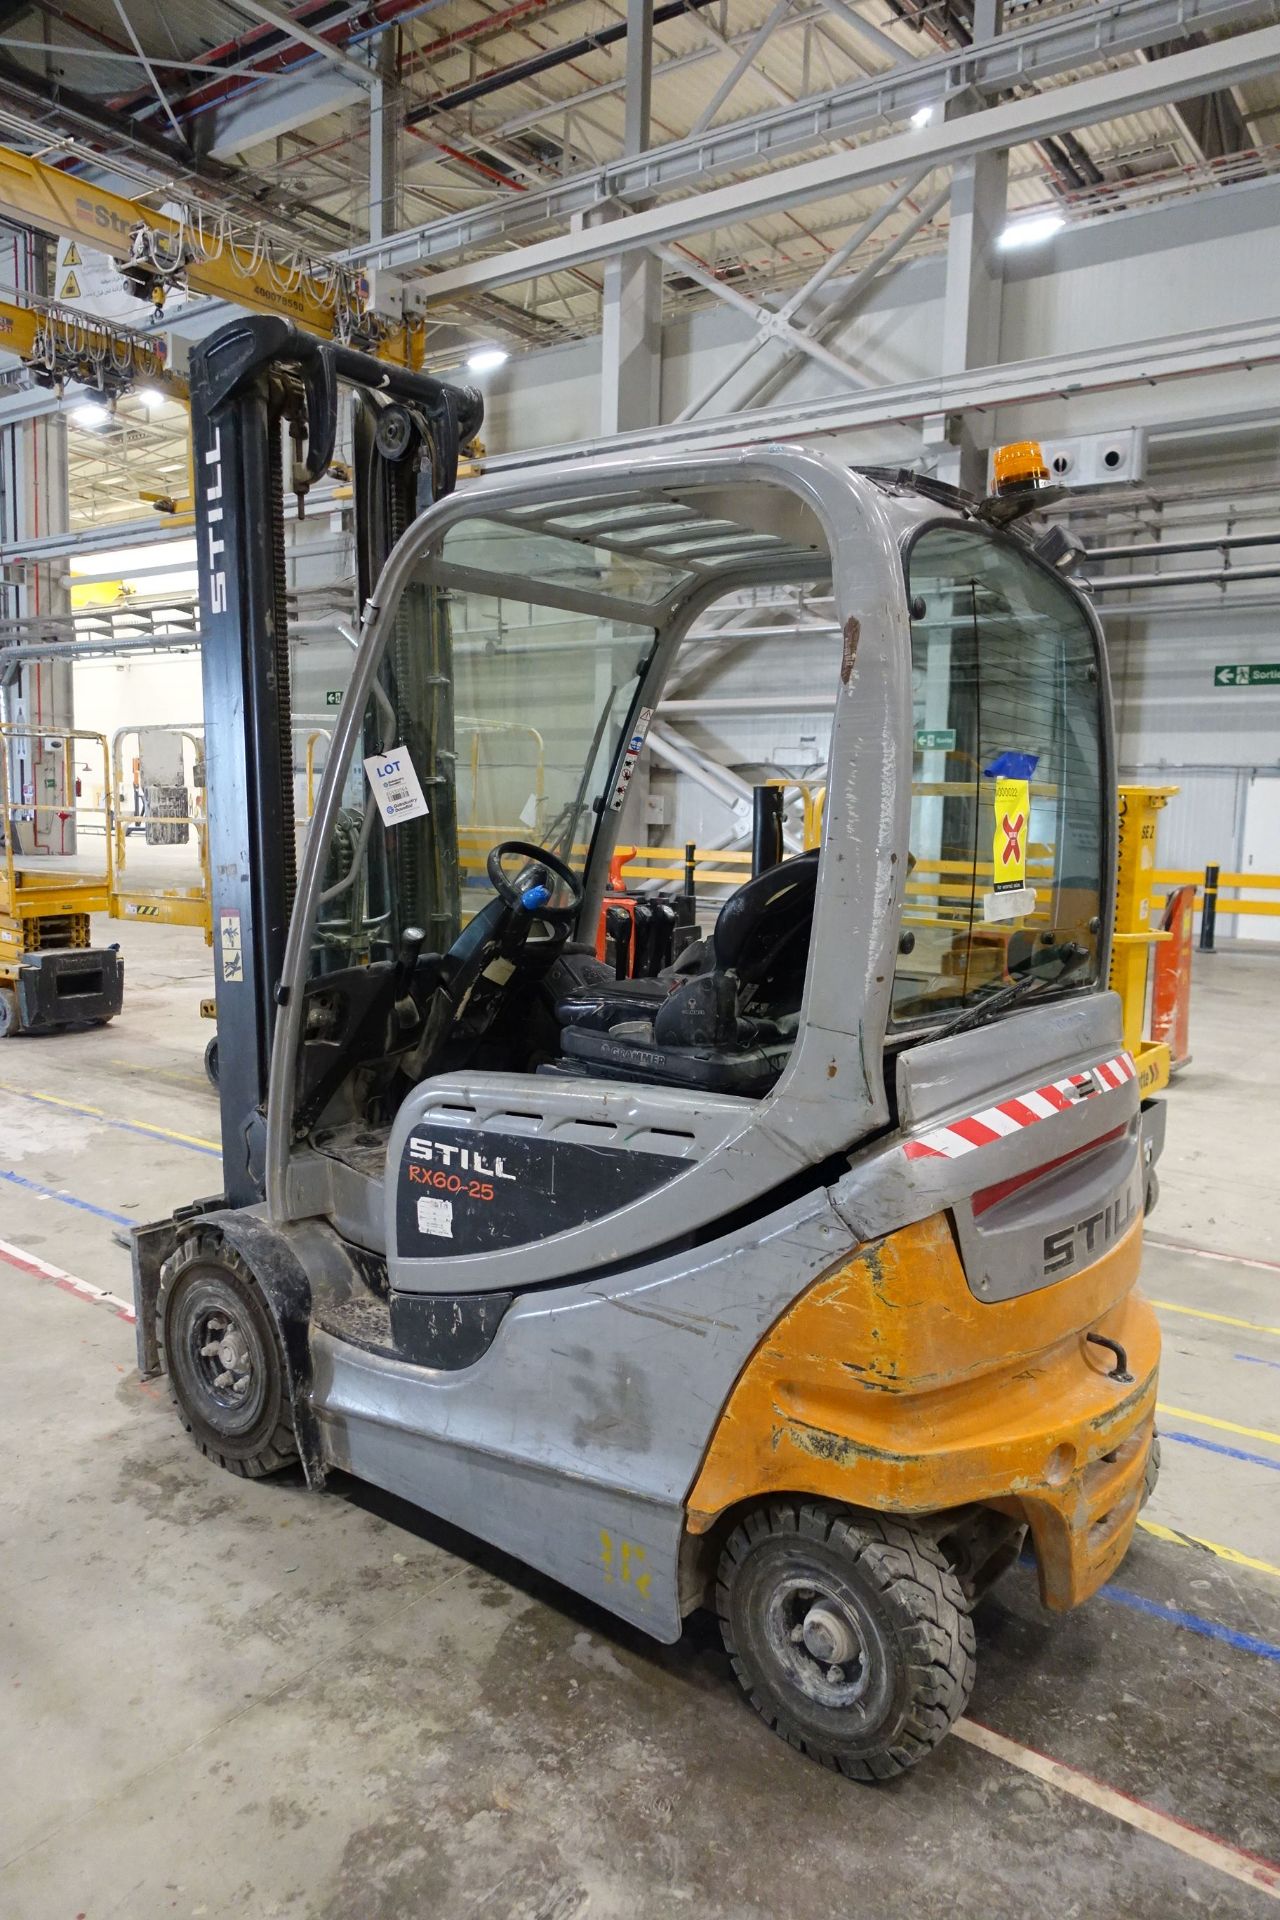 STILL RX60-25 Electric Forklift Truck, 2,500kg Capacity with Sideshift, Asset # 3000022, Ser # - Image 12 of 52